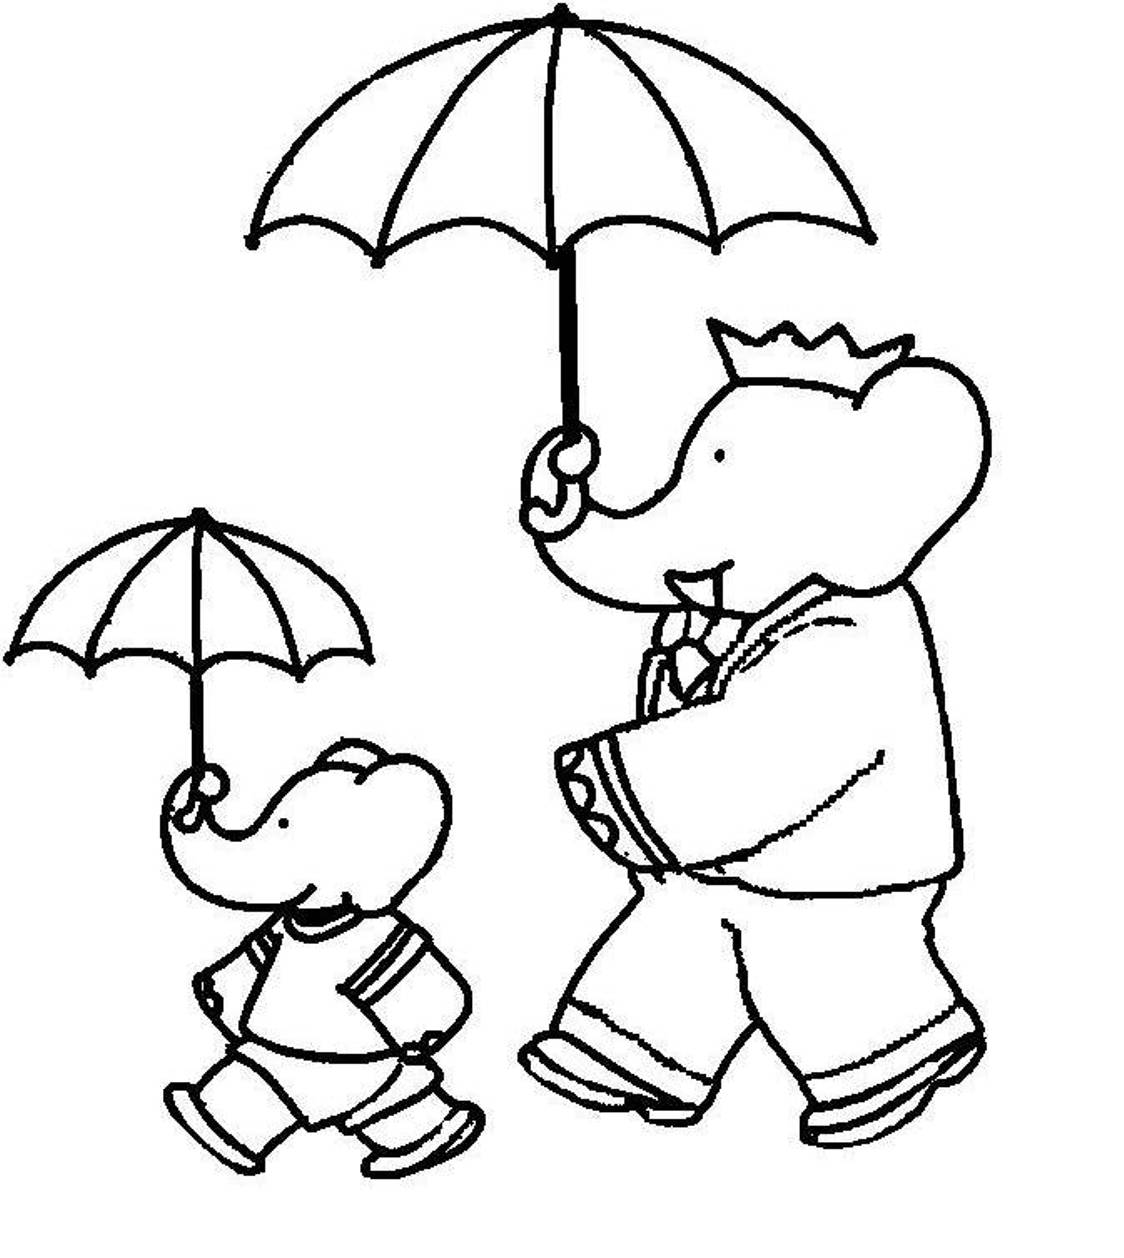 Elephant Babar coloring page